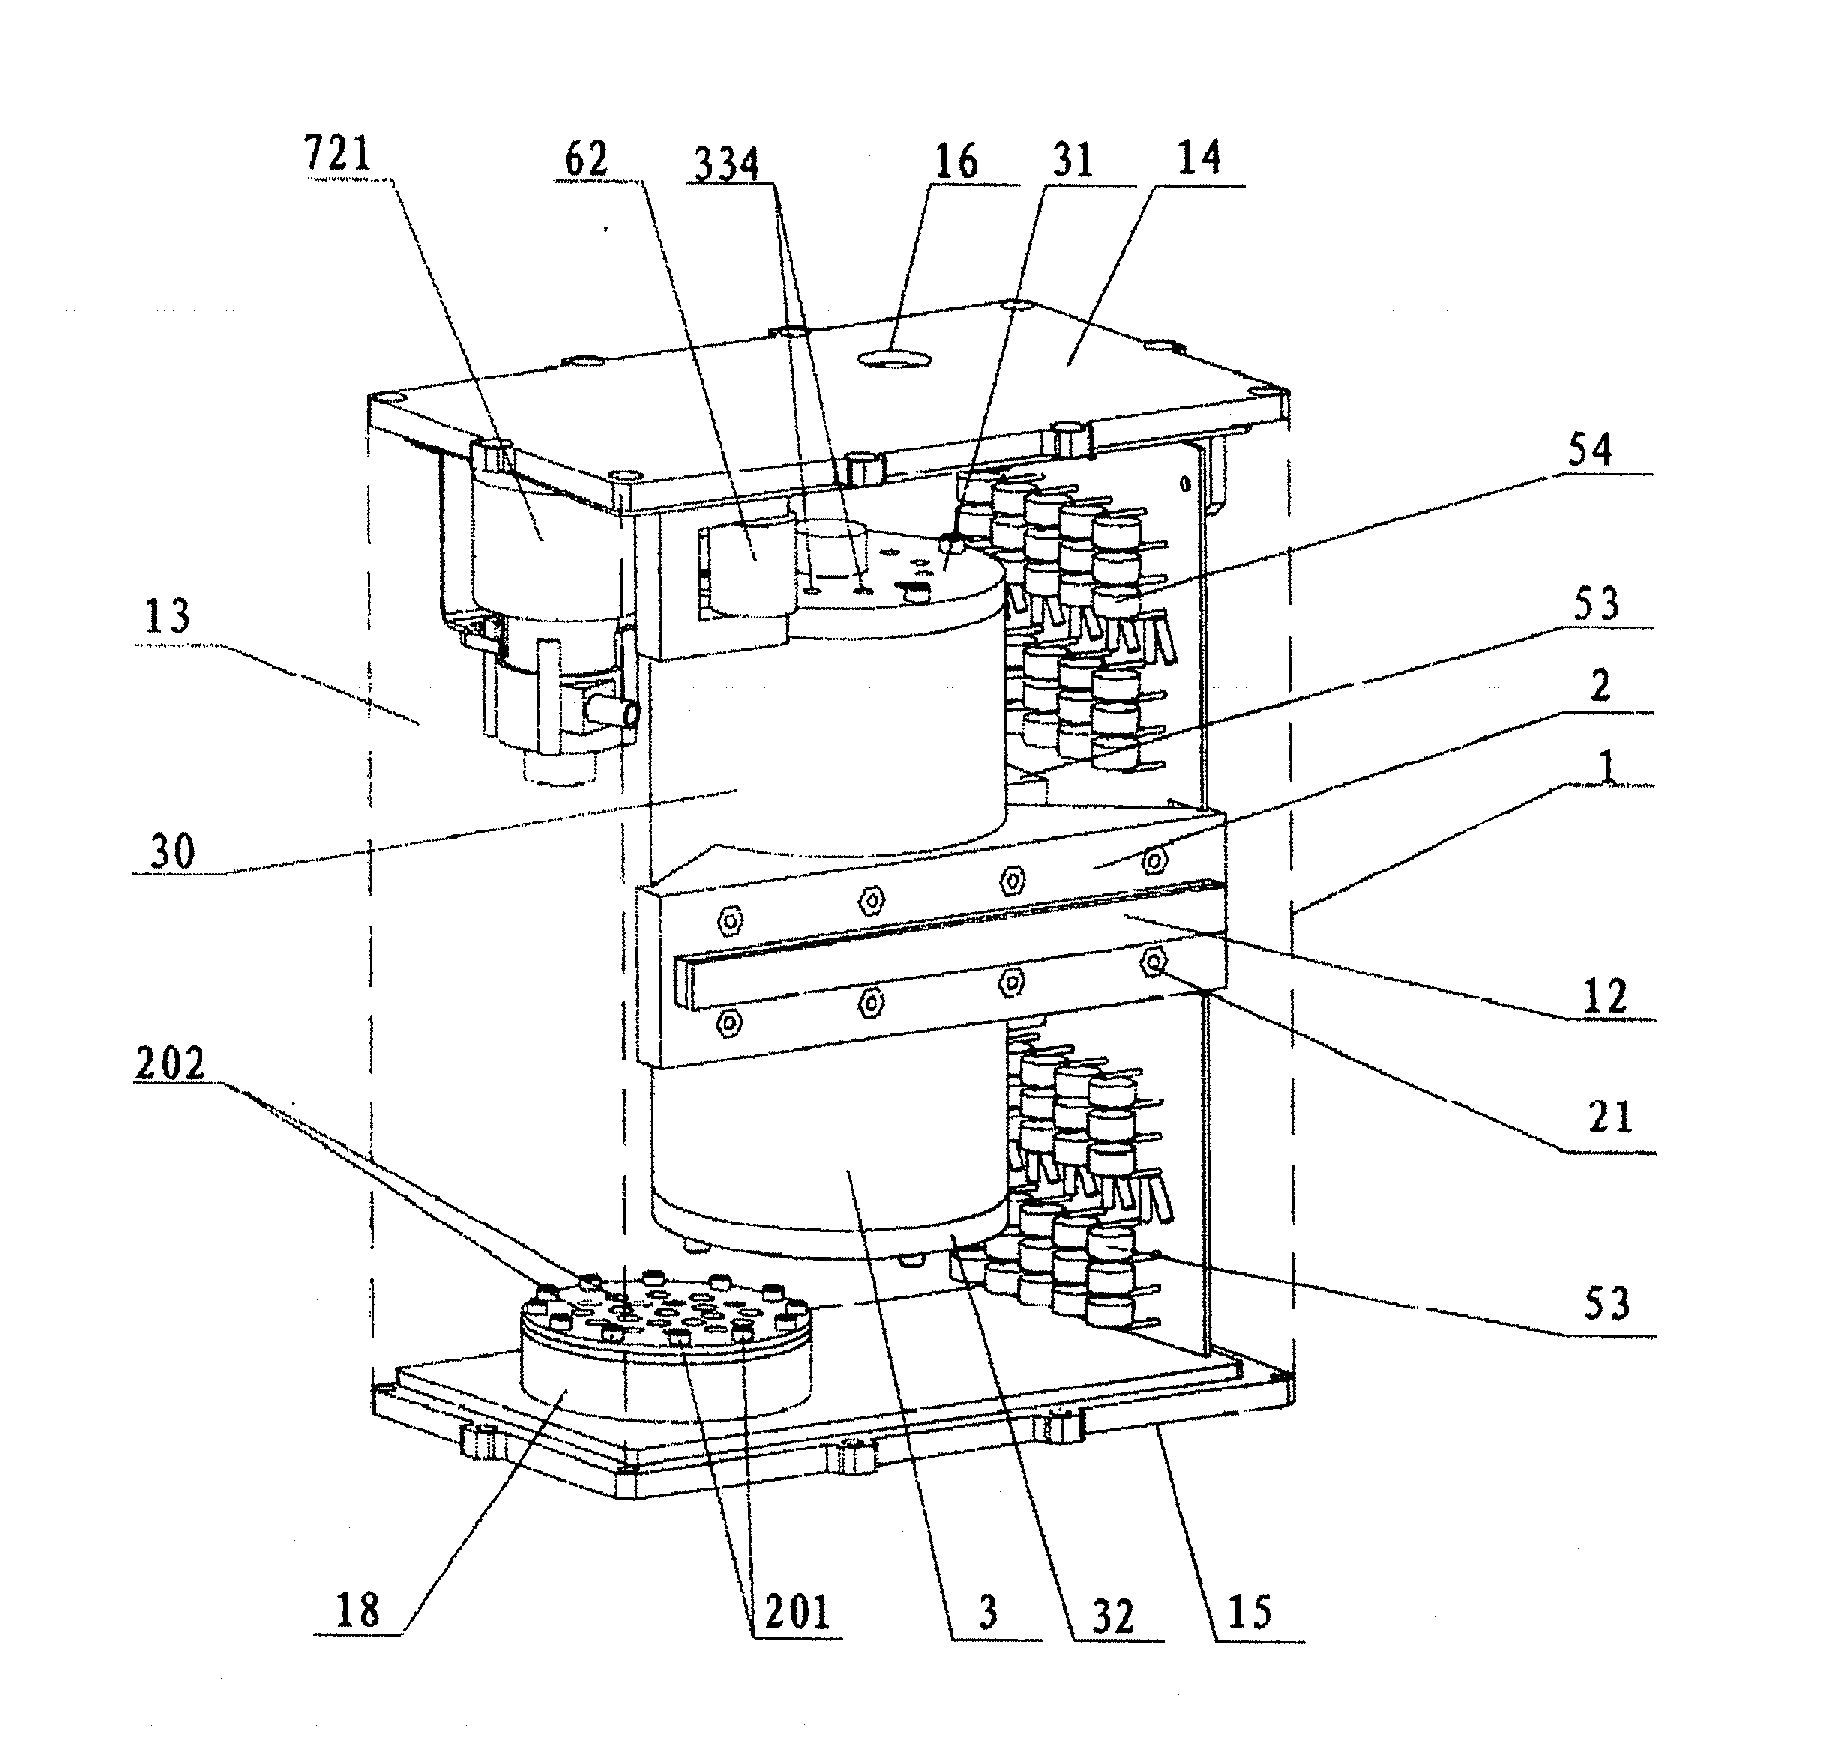 Installation case for radiation device, oil-cooling circulation system and x-ray generator